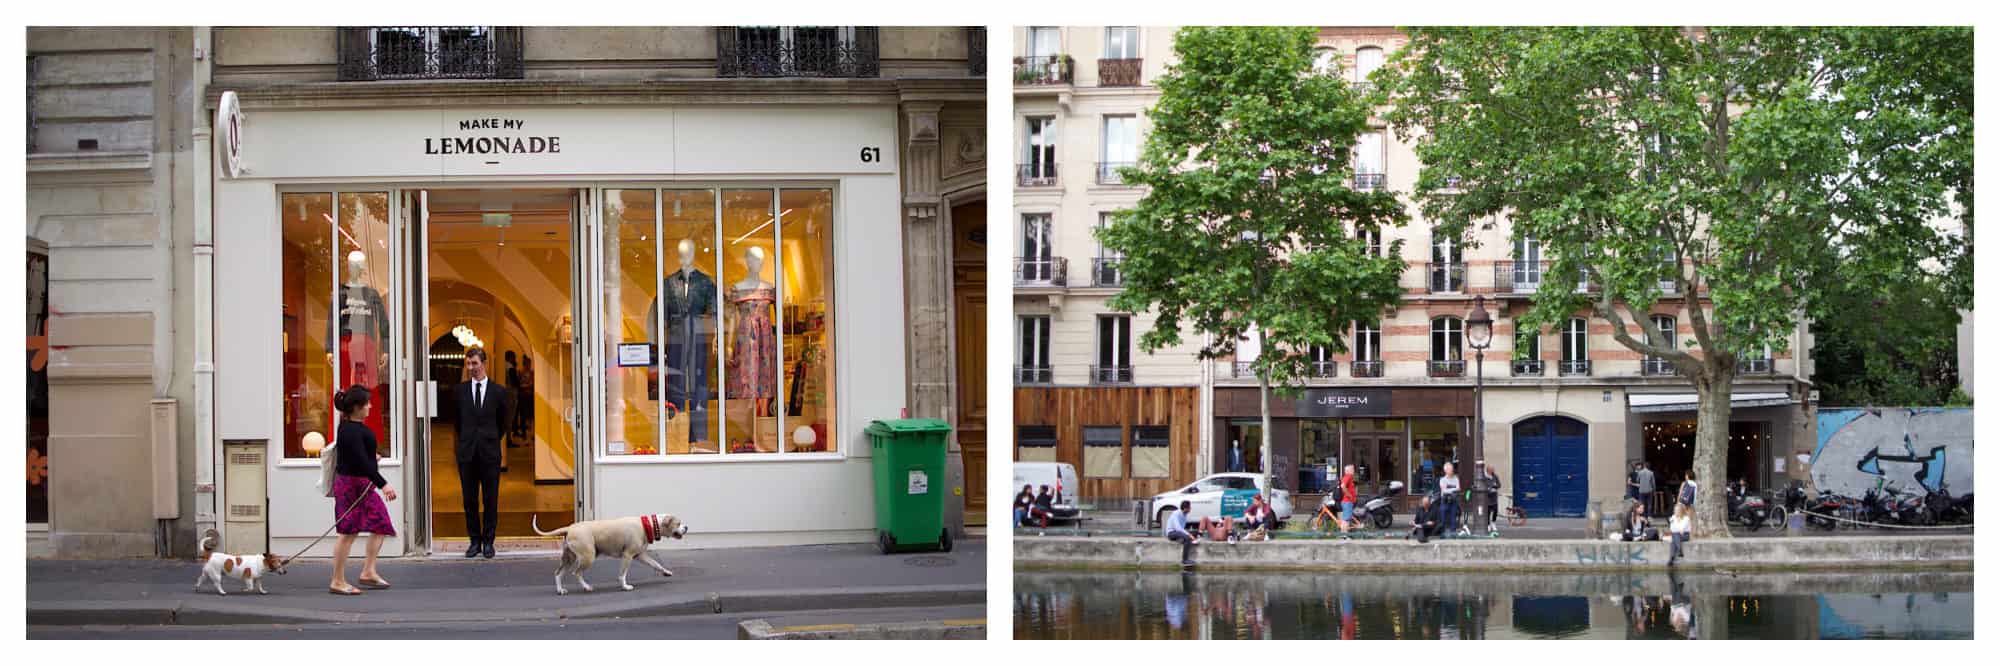 Outside Make My Lemonde clothing store on  the Canal Saint Martin (left). A view of the canal in Paris (right).